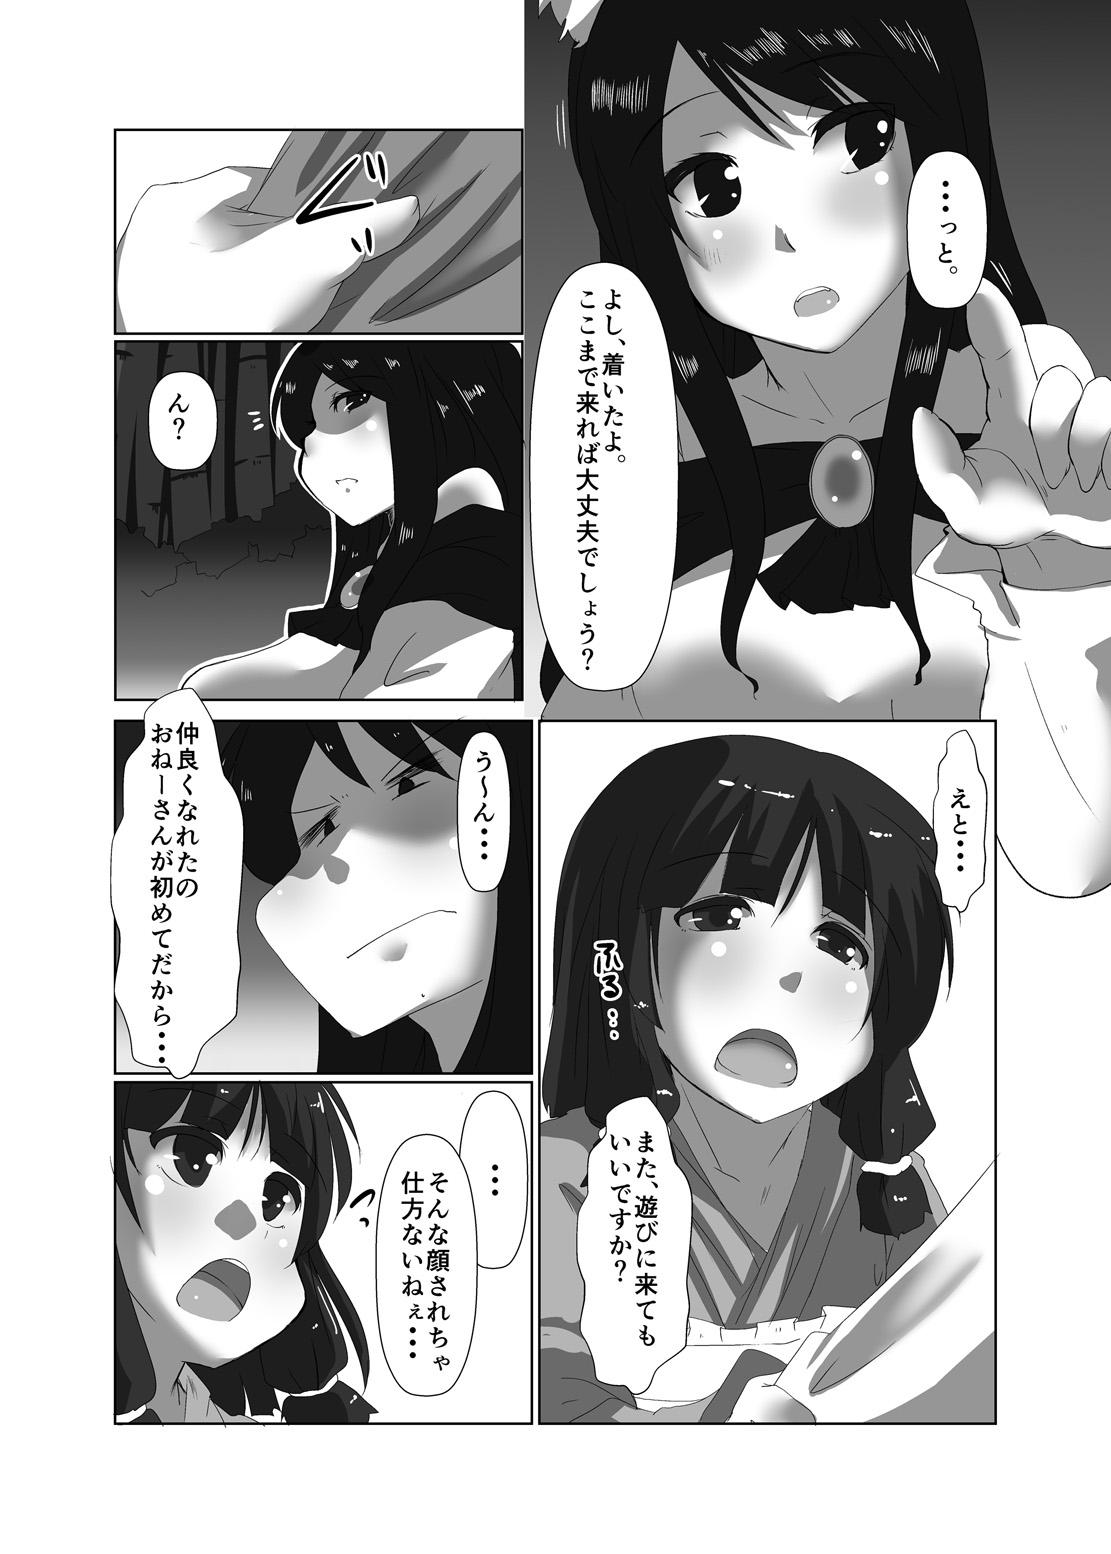 Danish ELonely Wolf no Onee-san - Touhou project Seduction - Page 10